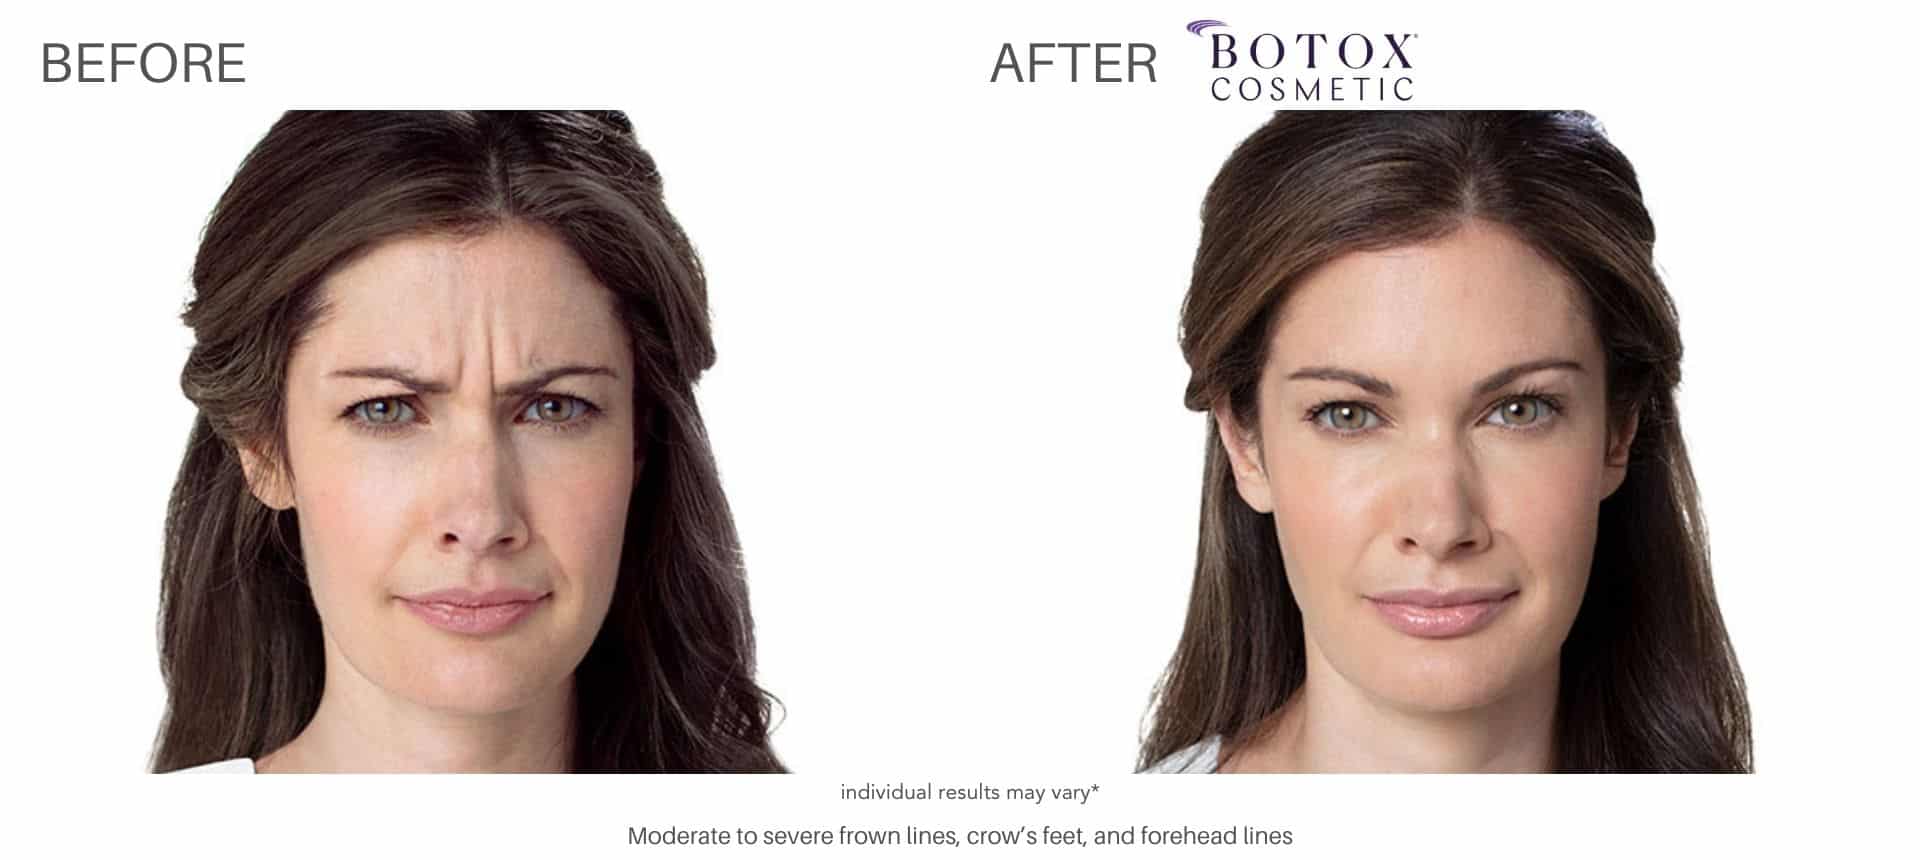 Woman's before and after photos from botox